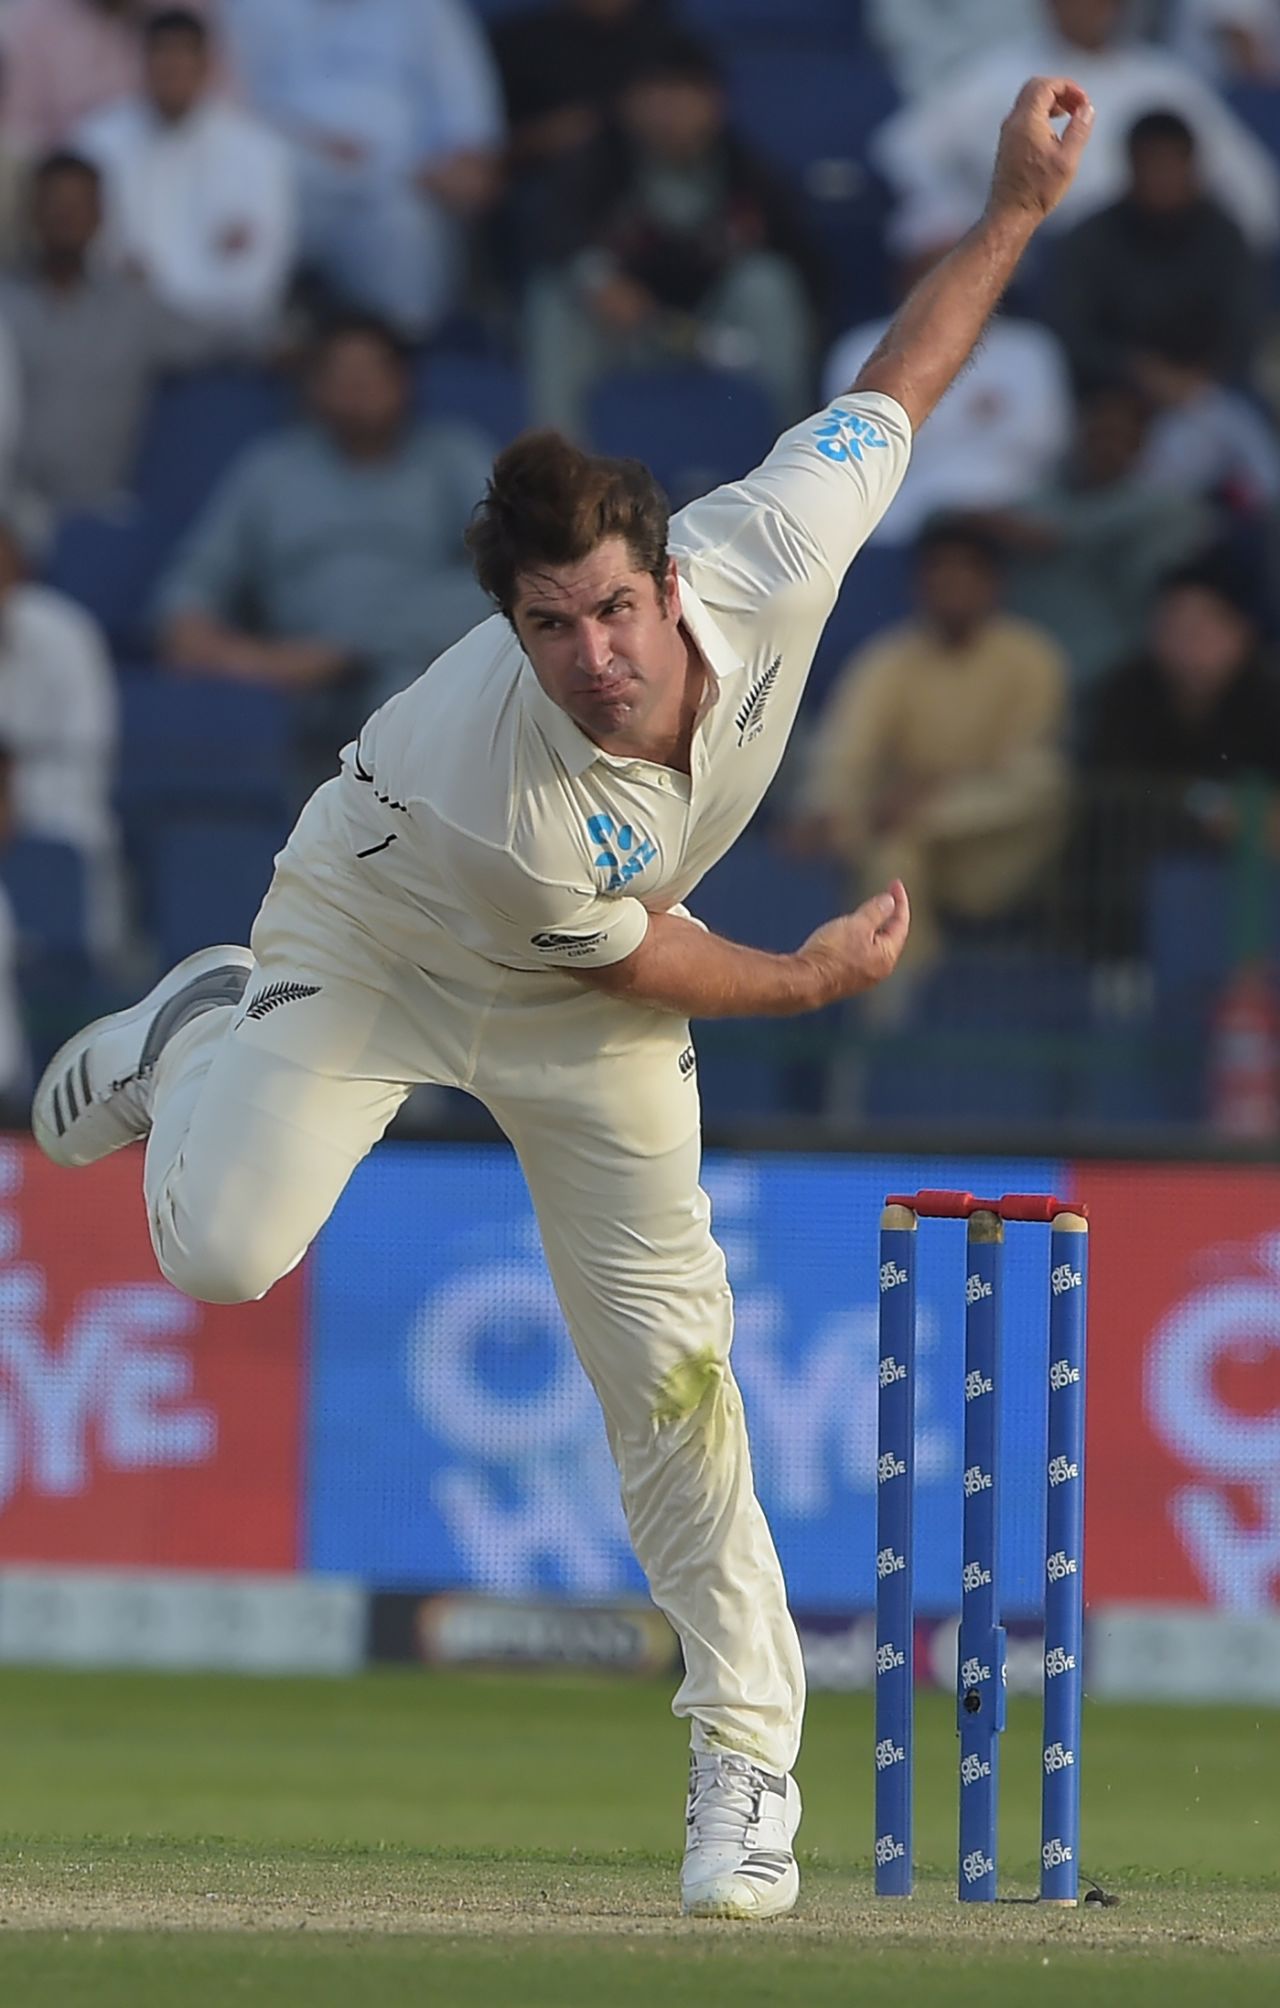 Colin de Grandhomme in his follow-through, Pakistan v New Zealand, 1st Test, 1st day, Abu Dhabi, 